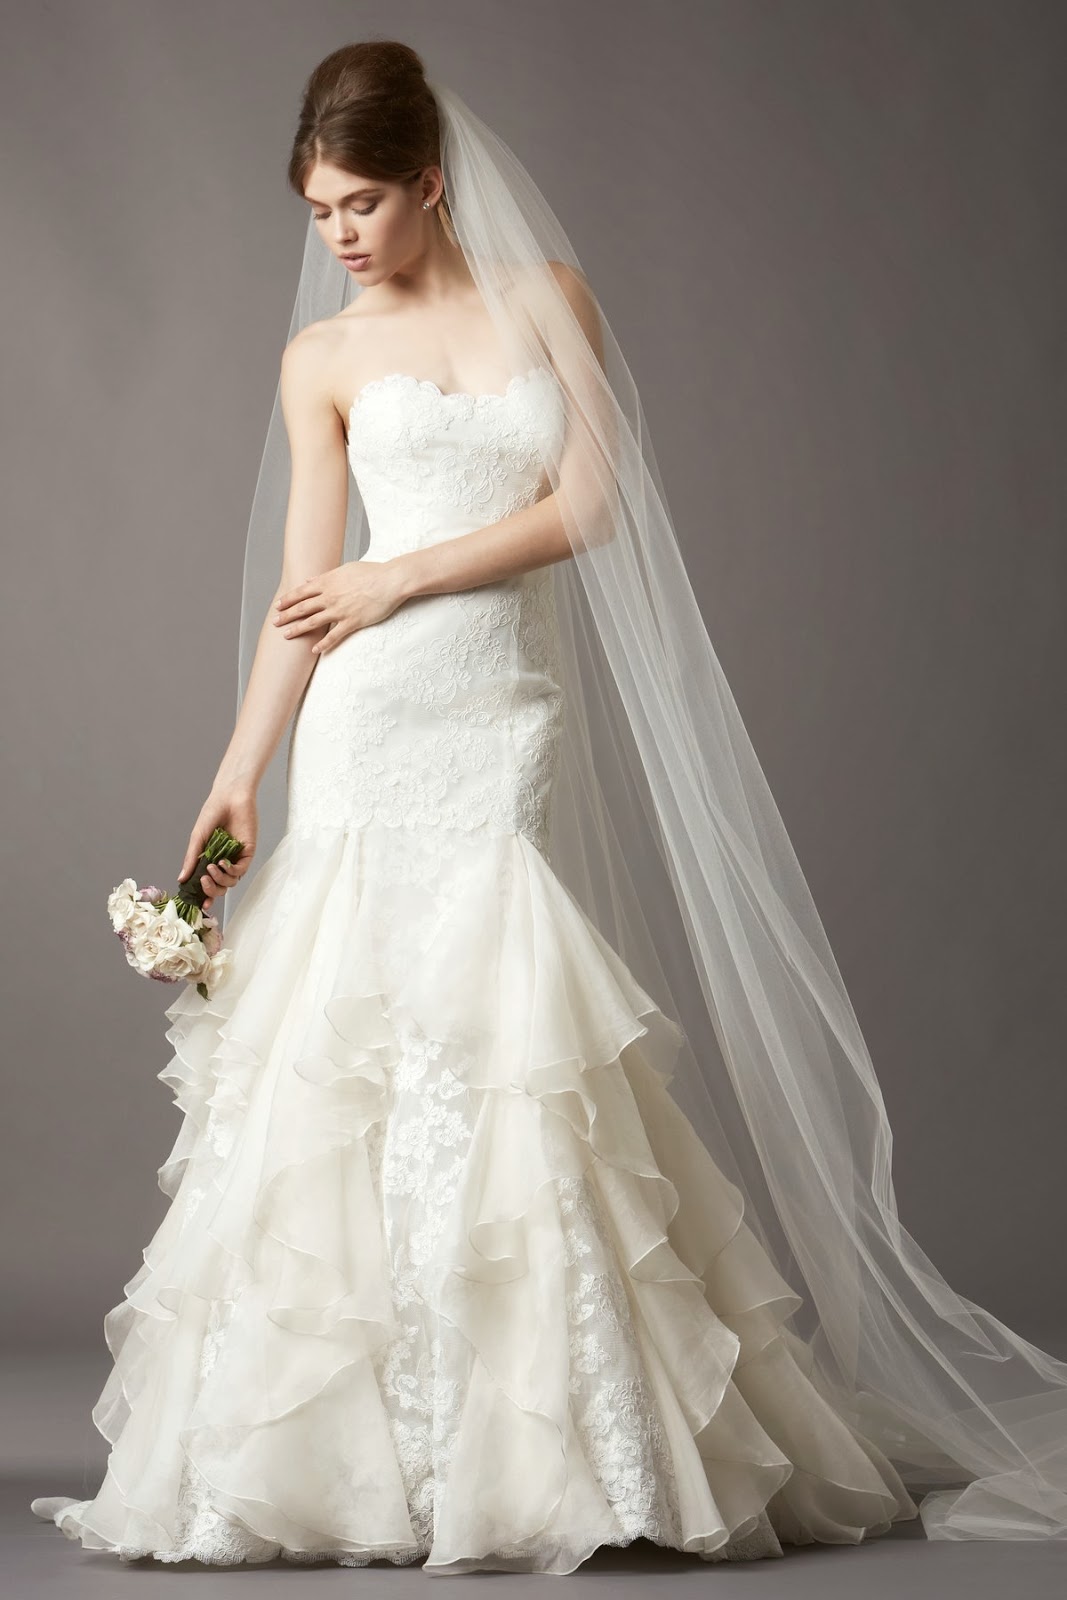 Link Camp: Wedding Dress Collection 2013 (21) - Expensive Dresses